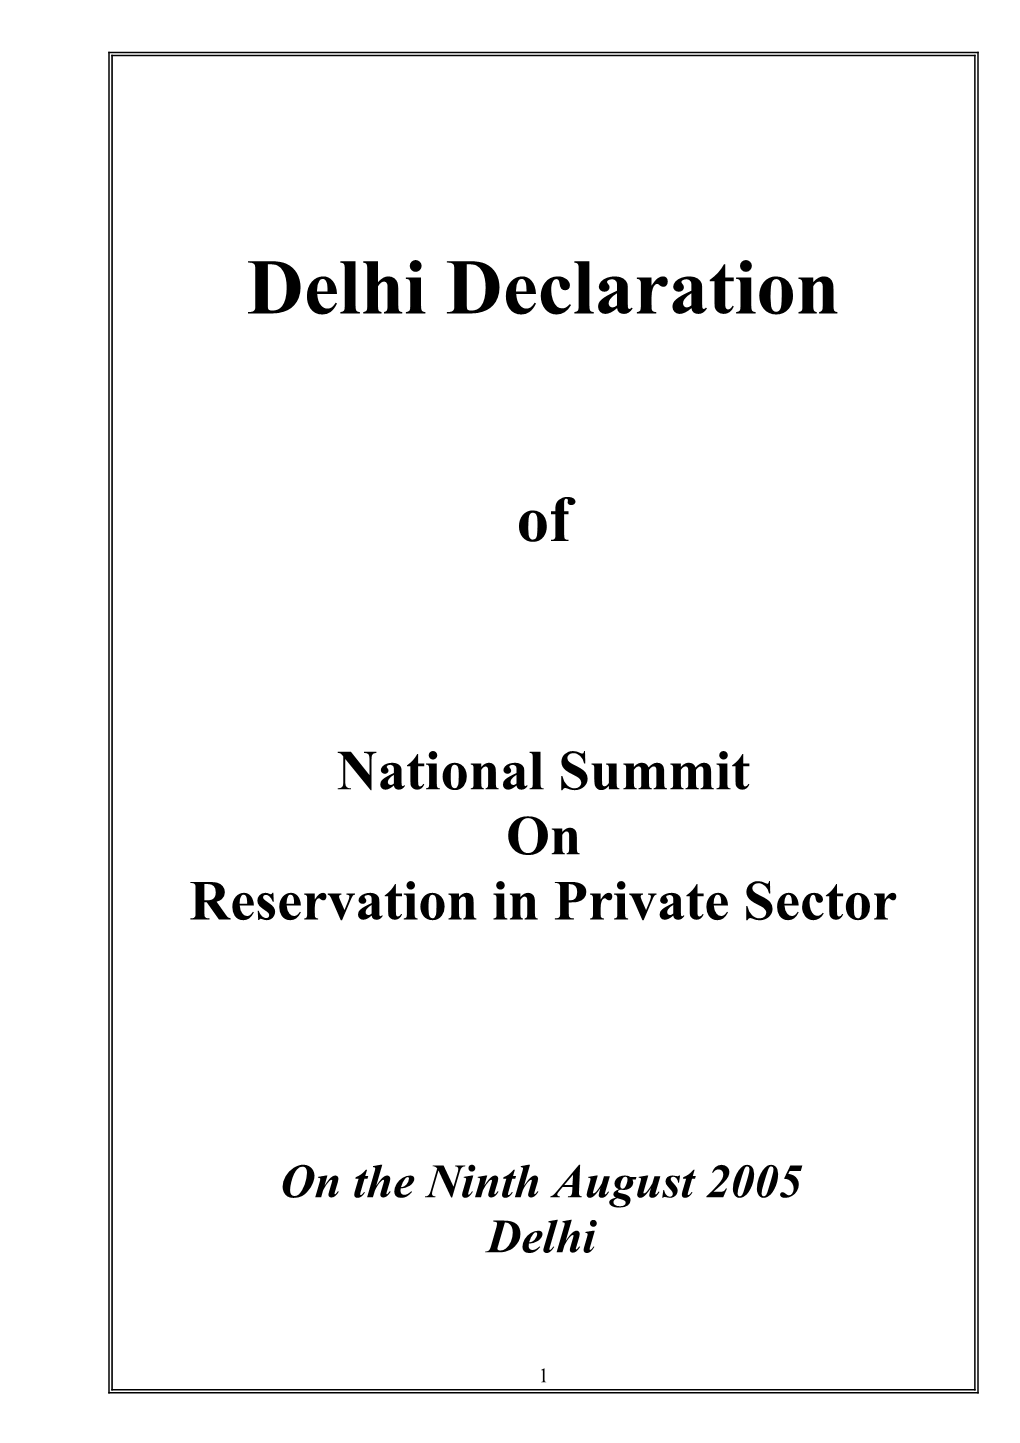 Reservation in Private Sector the Debate